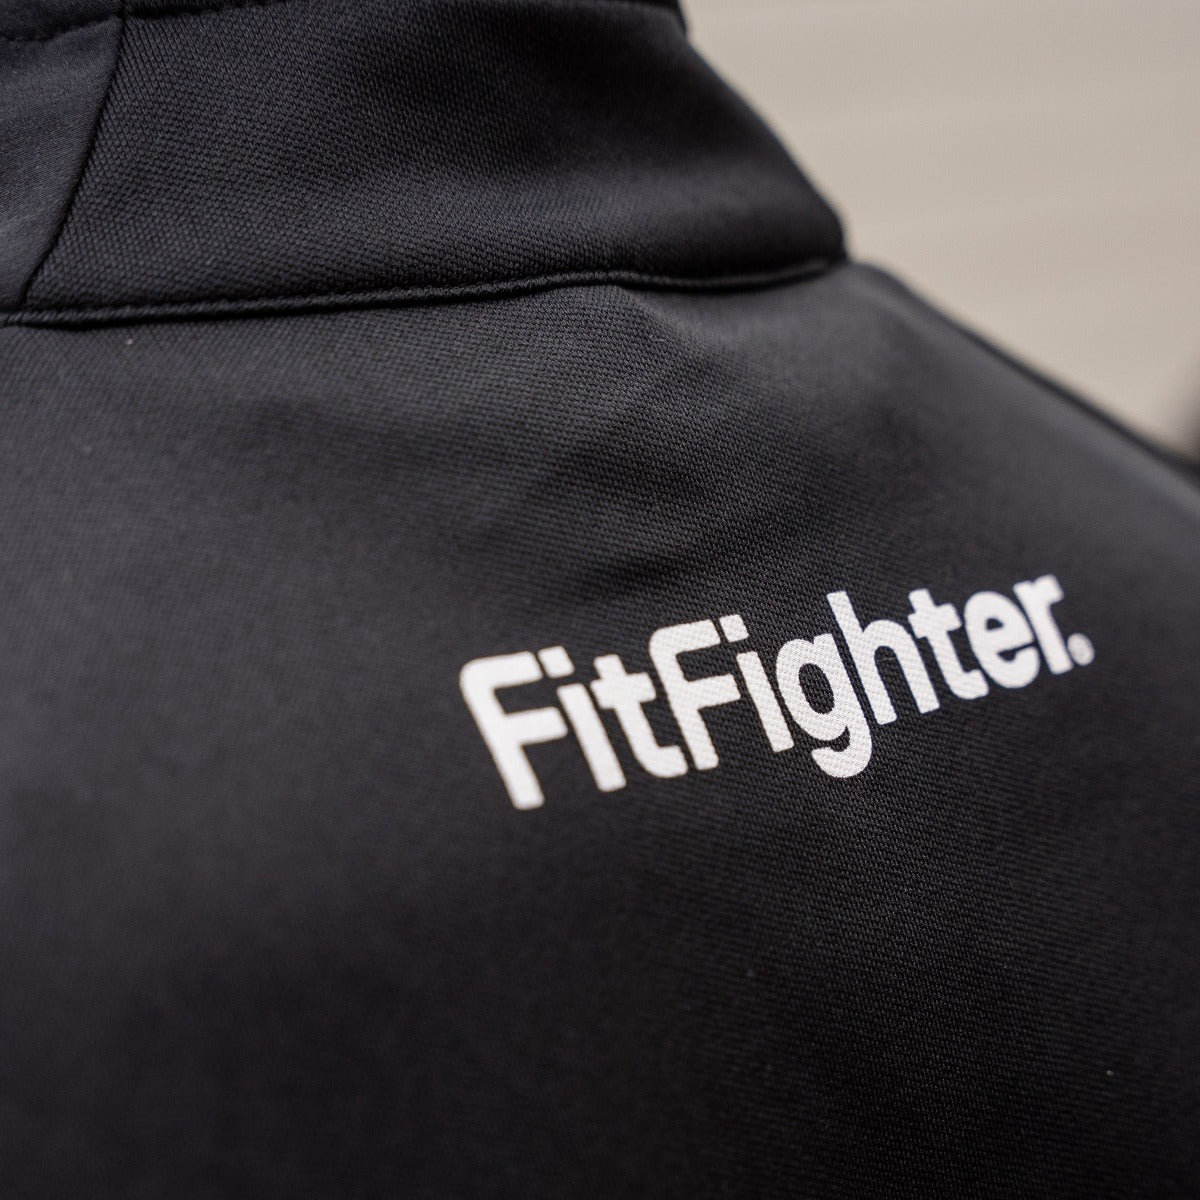 FitFighter